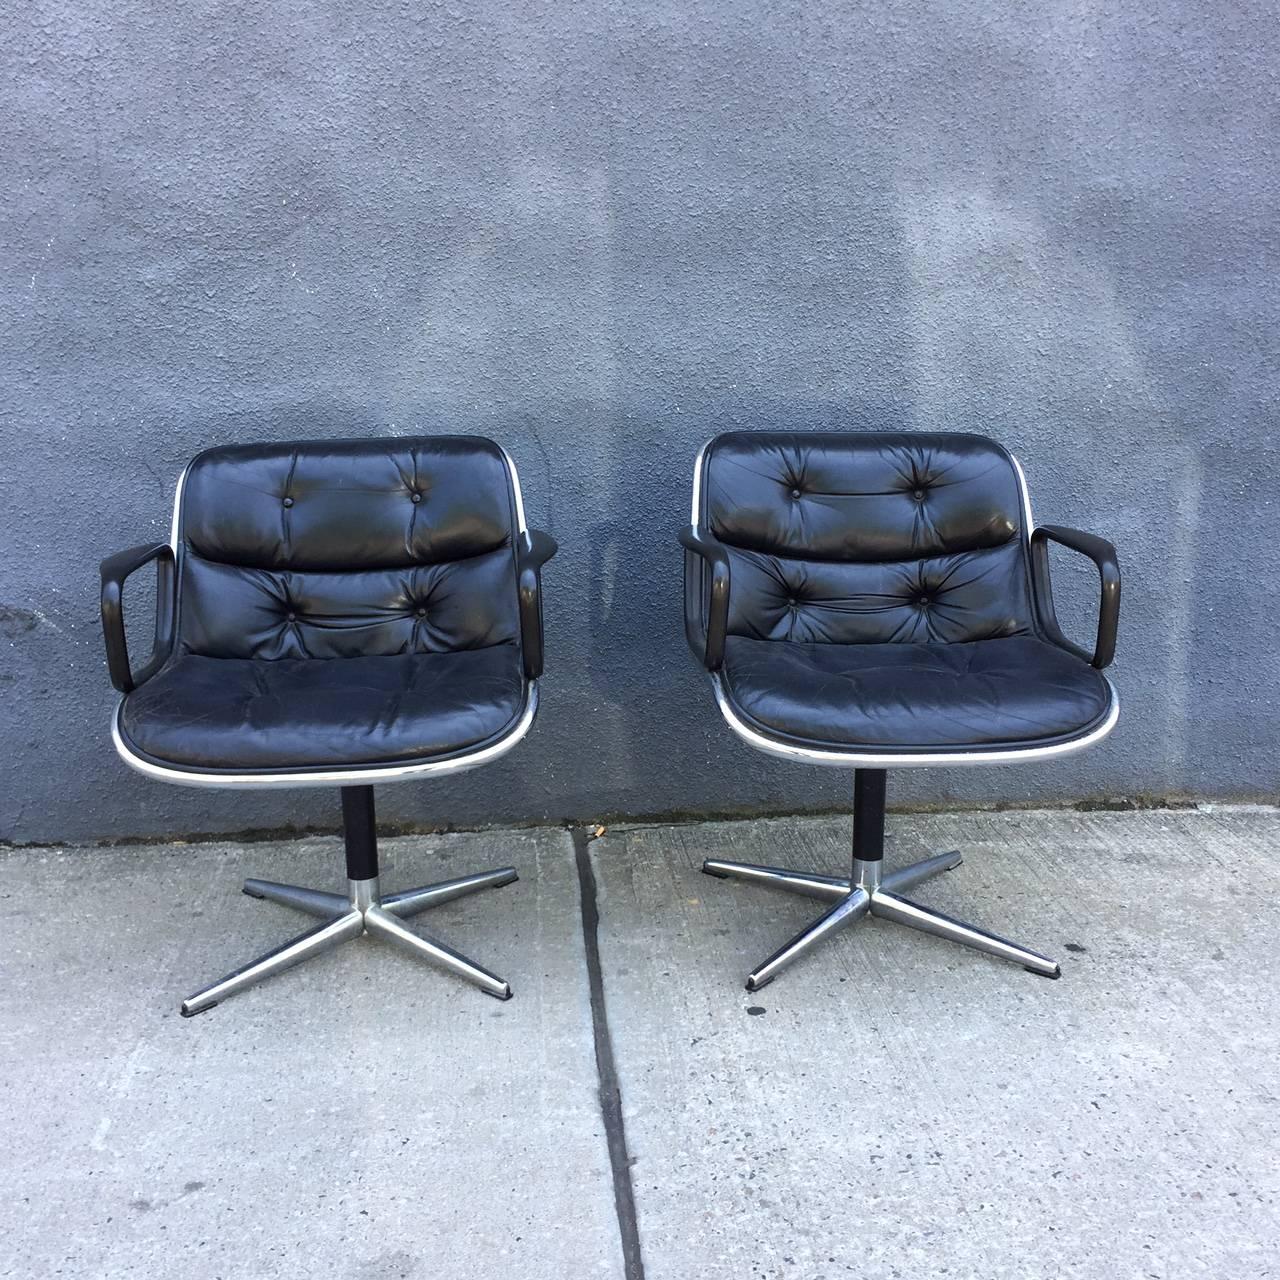 For you consideration is a pair of vintage Charles Pollock for Knoll accent chairs.

These chairs are icons of Mid-Century Modern design and have been in continuous production by Knoll since their introduction in 1963. The architecture of the